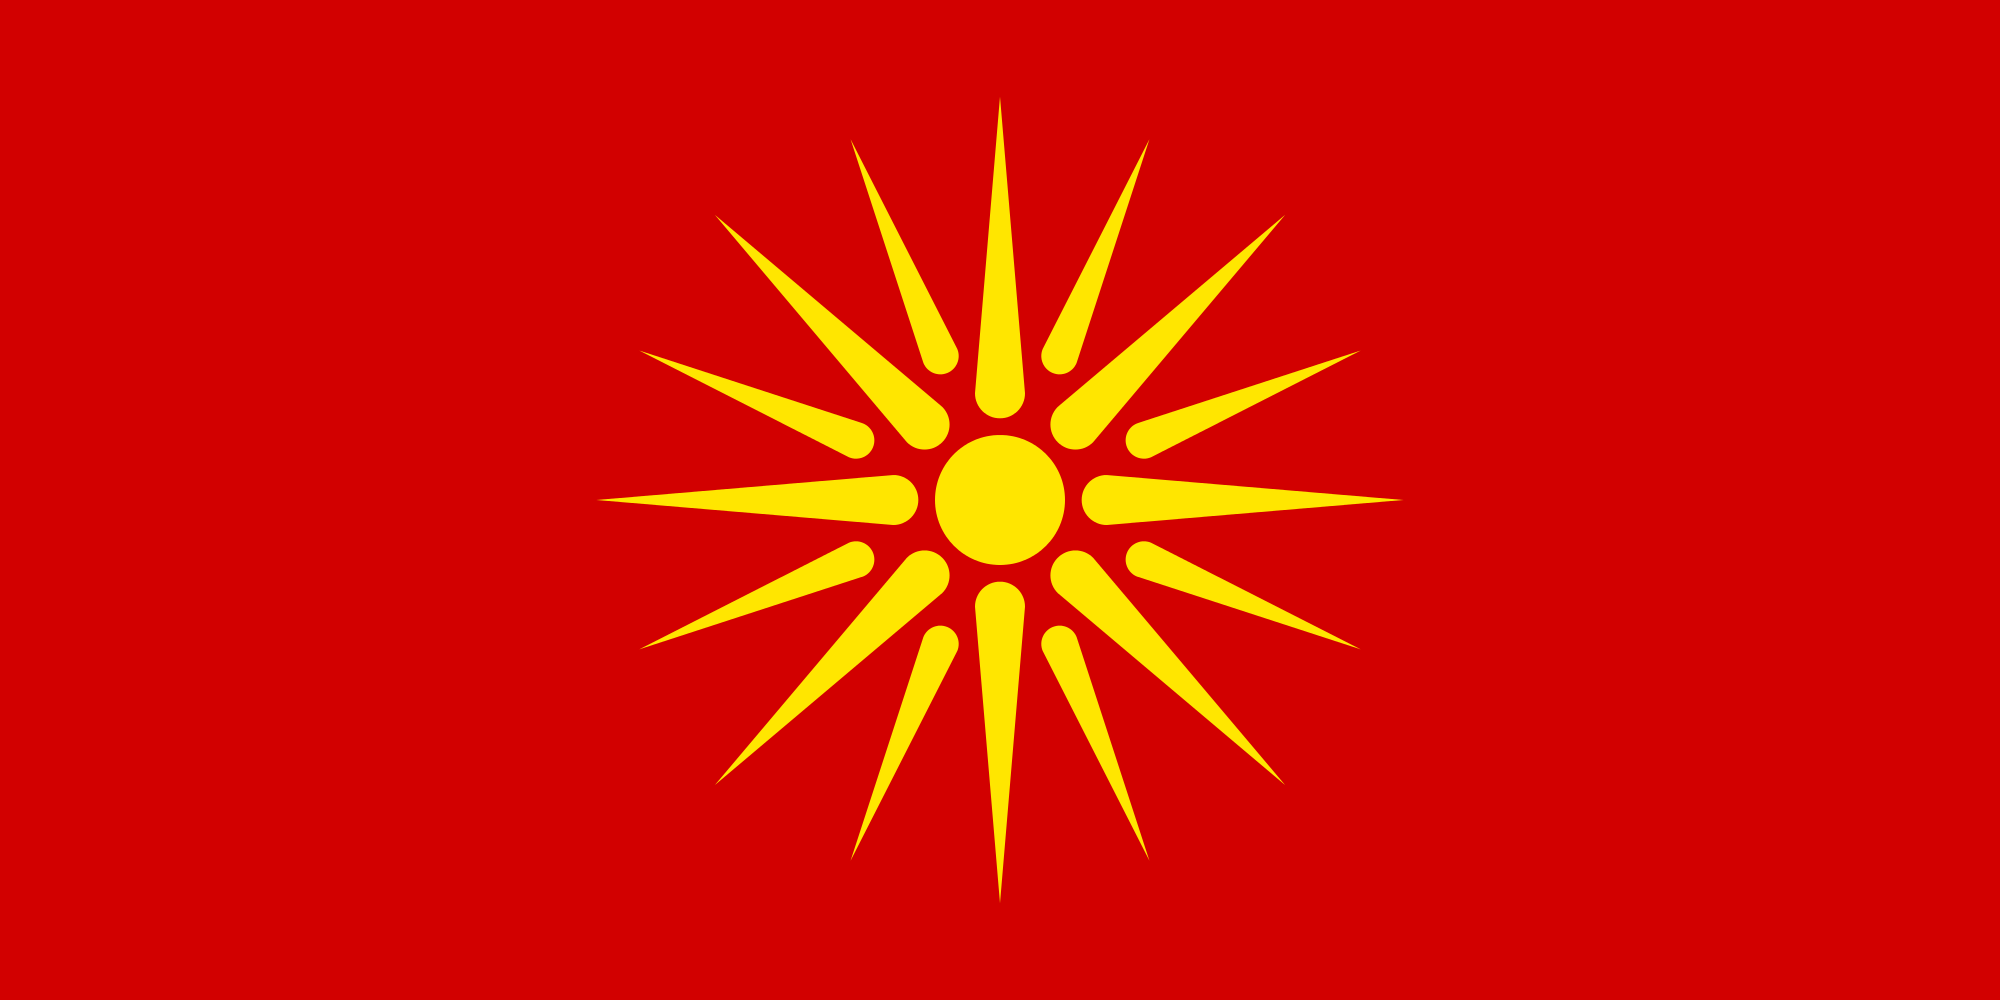 flag-of-the-republic-of-macedonia-1992-1995